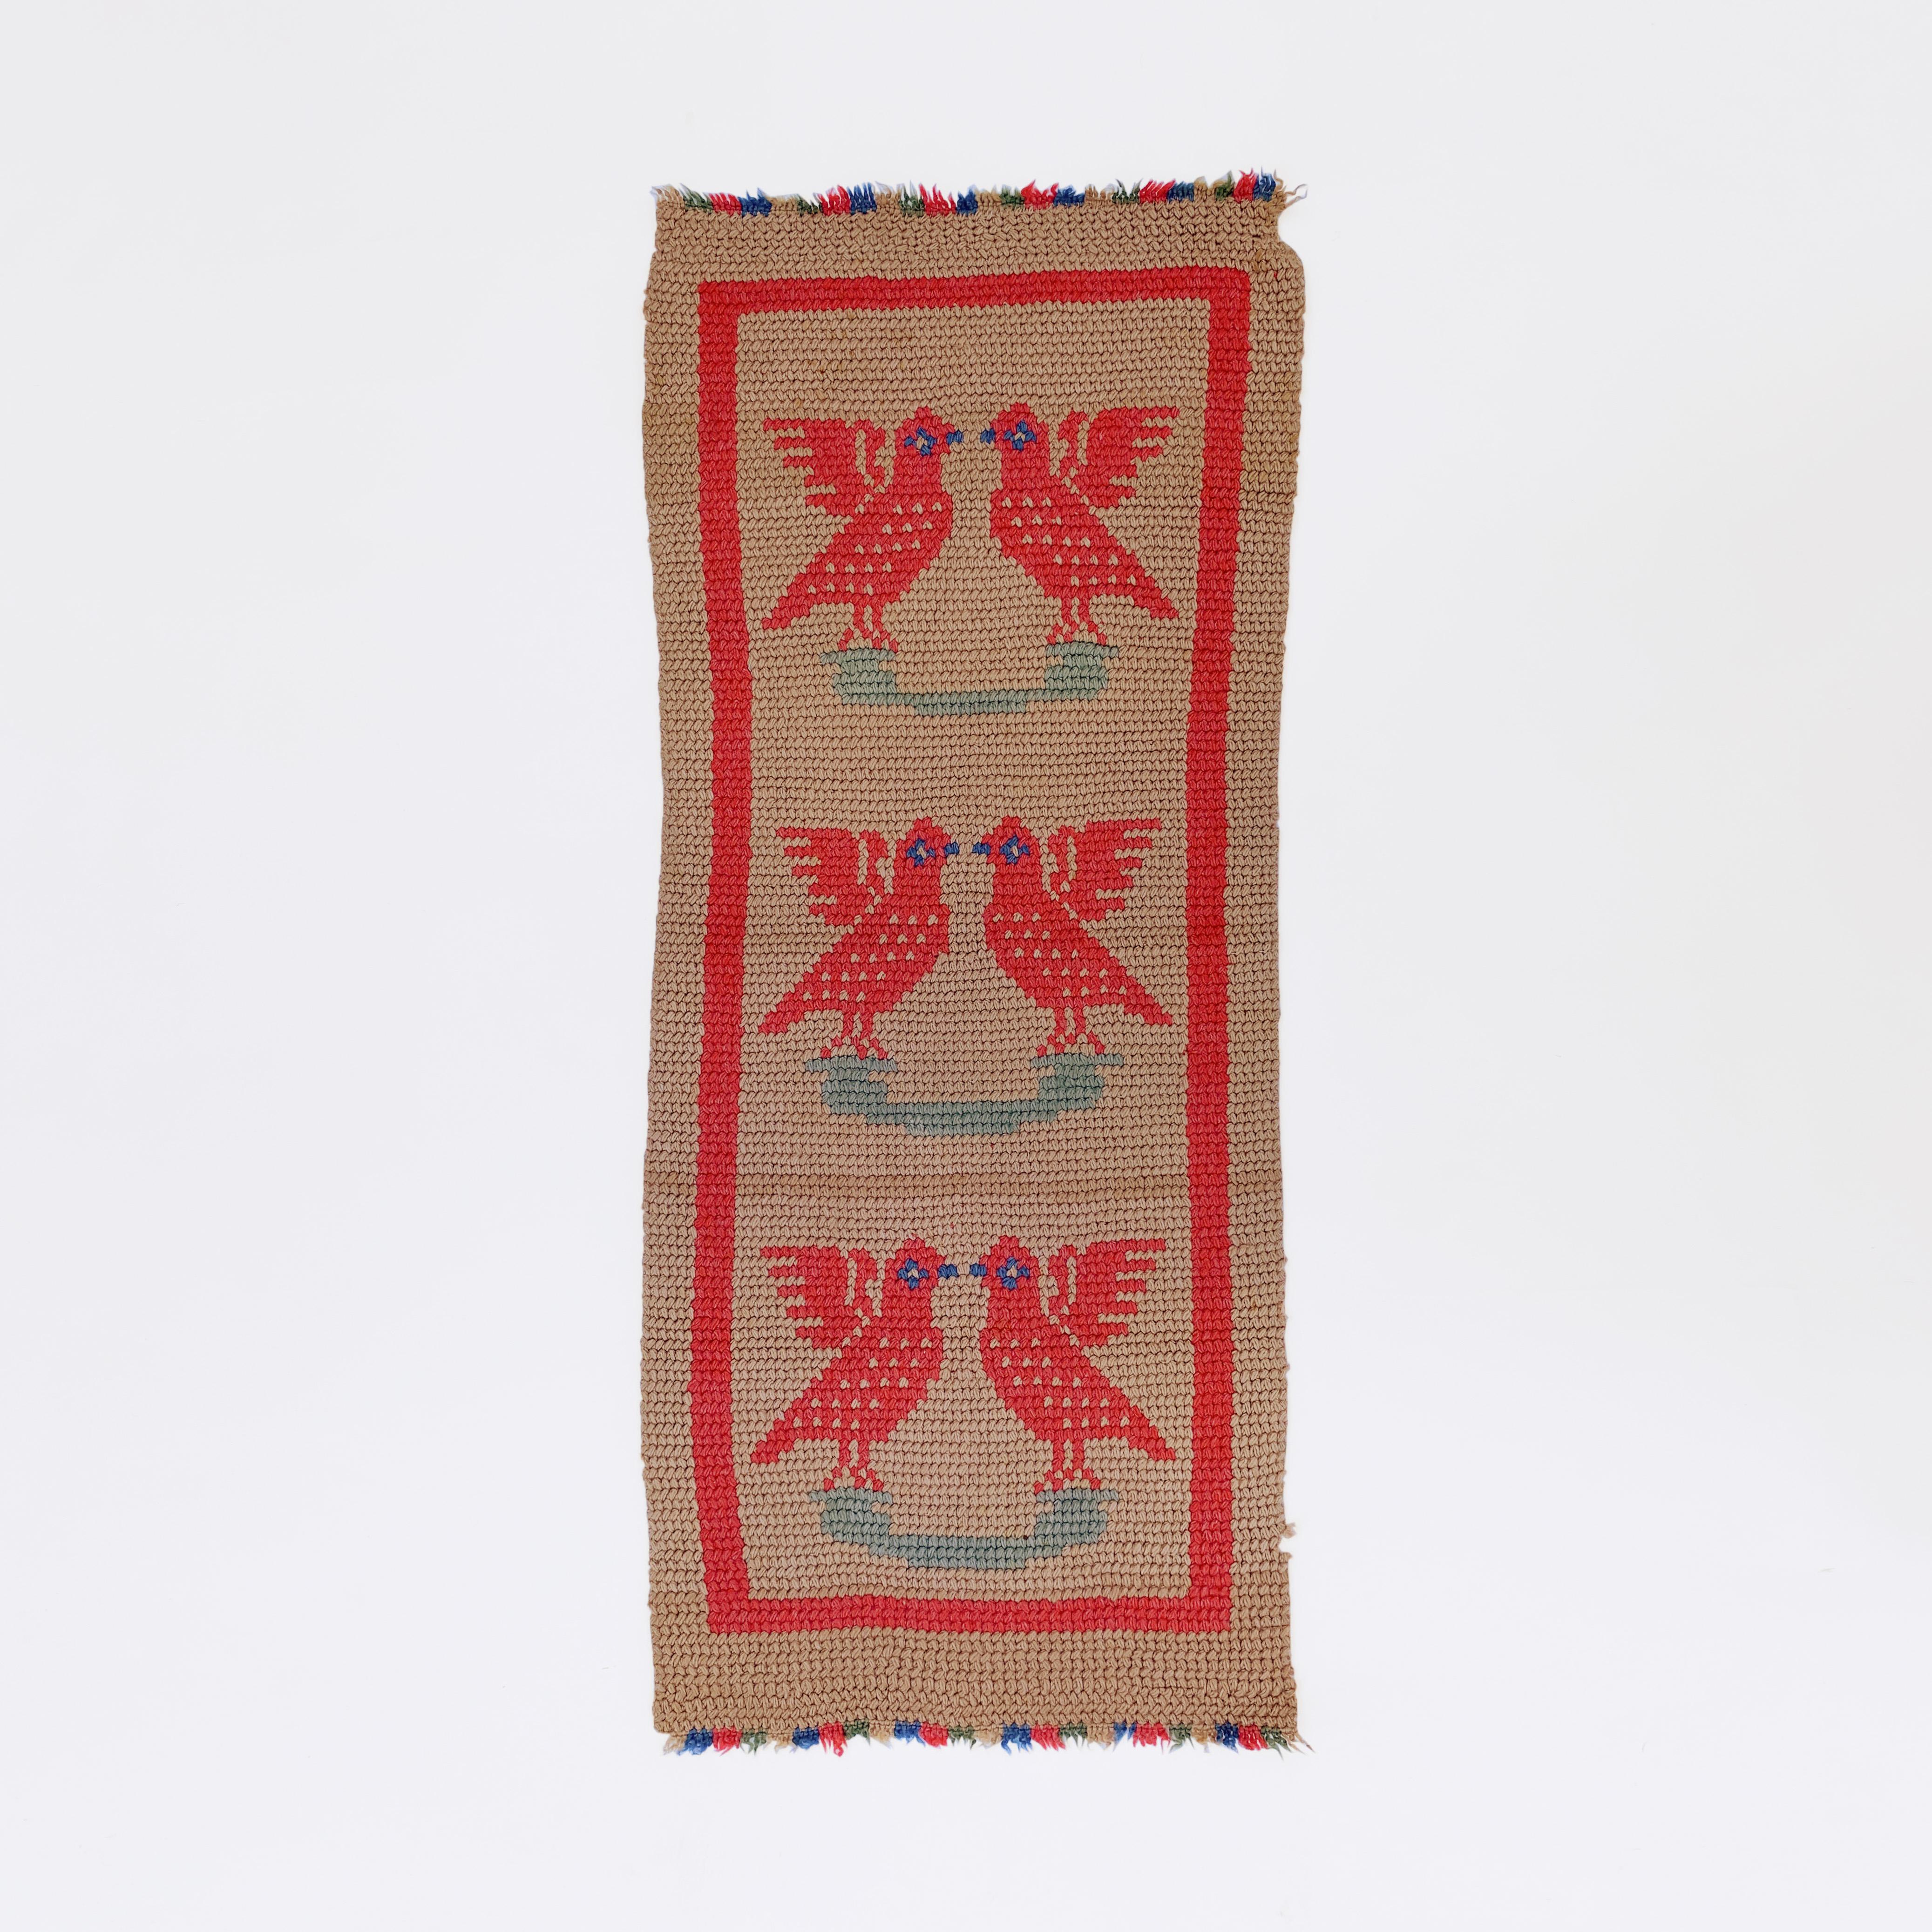 This exquisite rug, perfect for a corridor or wall decoration, comes from the Northern Greece village of Vertiskos. Hand-crocheted in a wool mix yarn, this runner features a repeating pattern of two red birds sitting on an olive branch, facing each